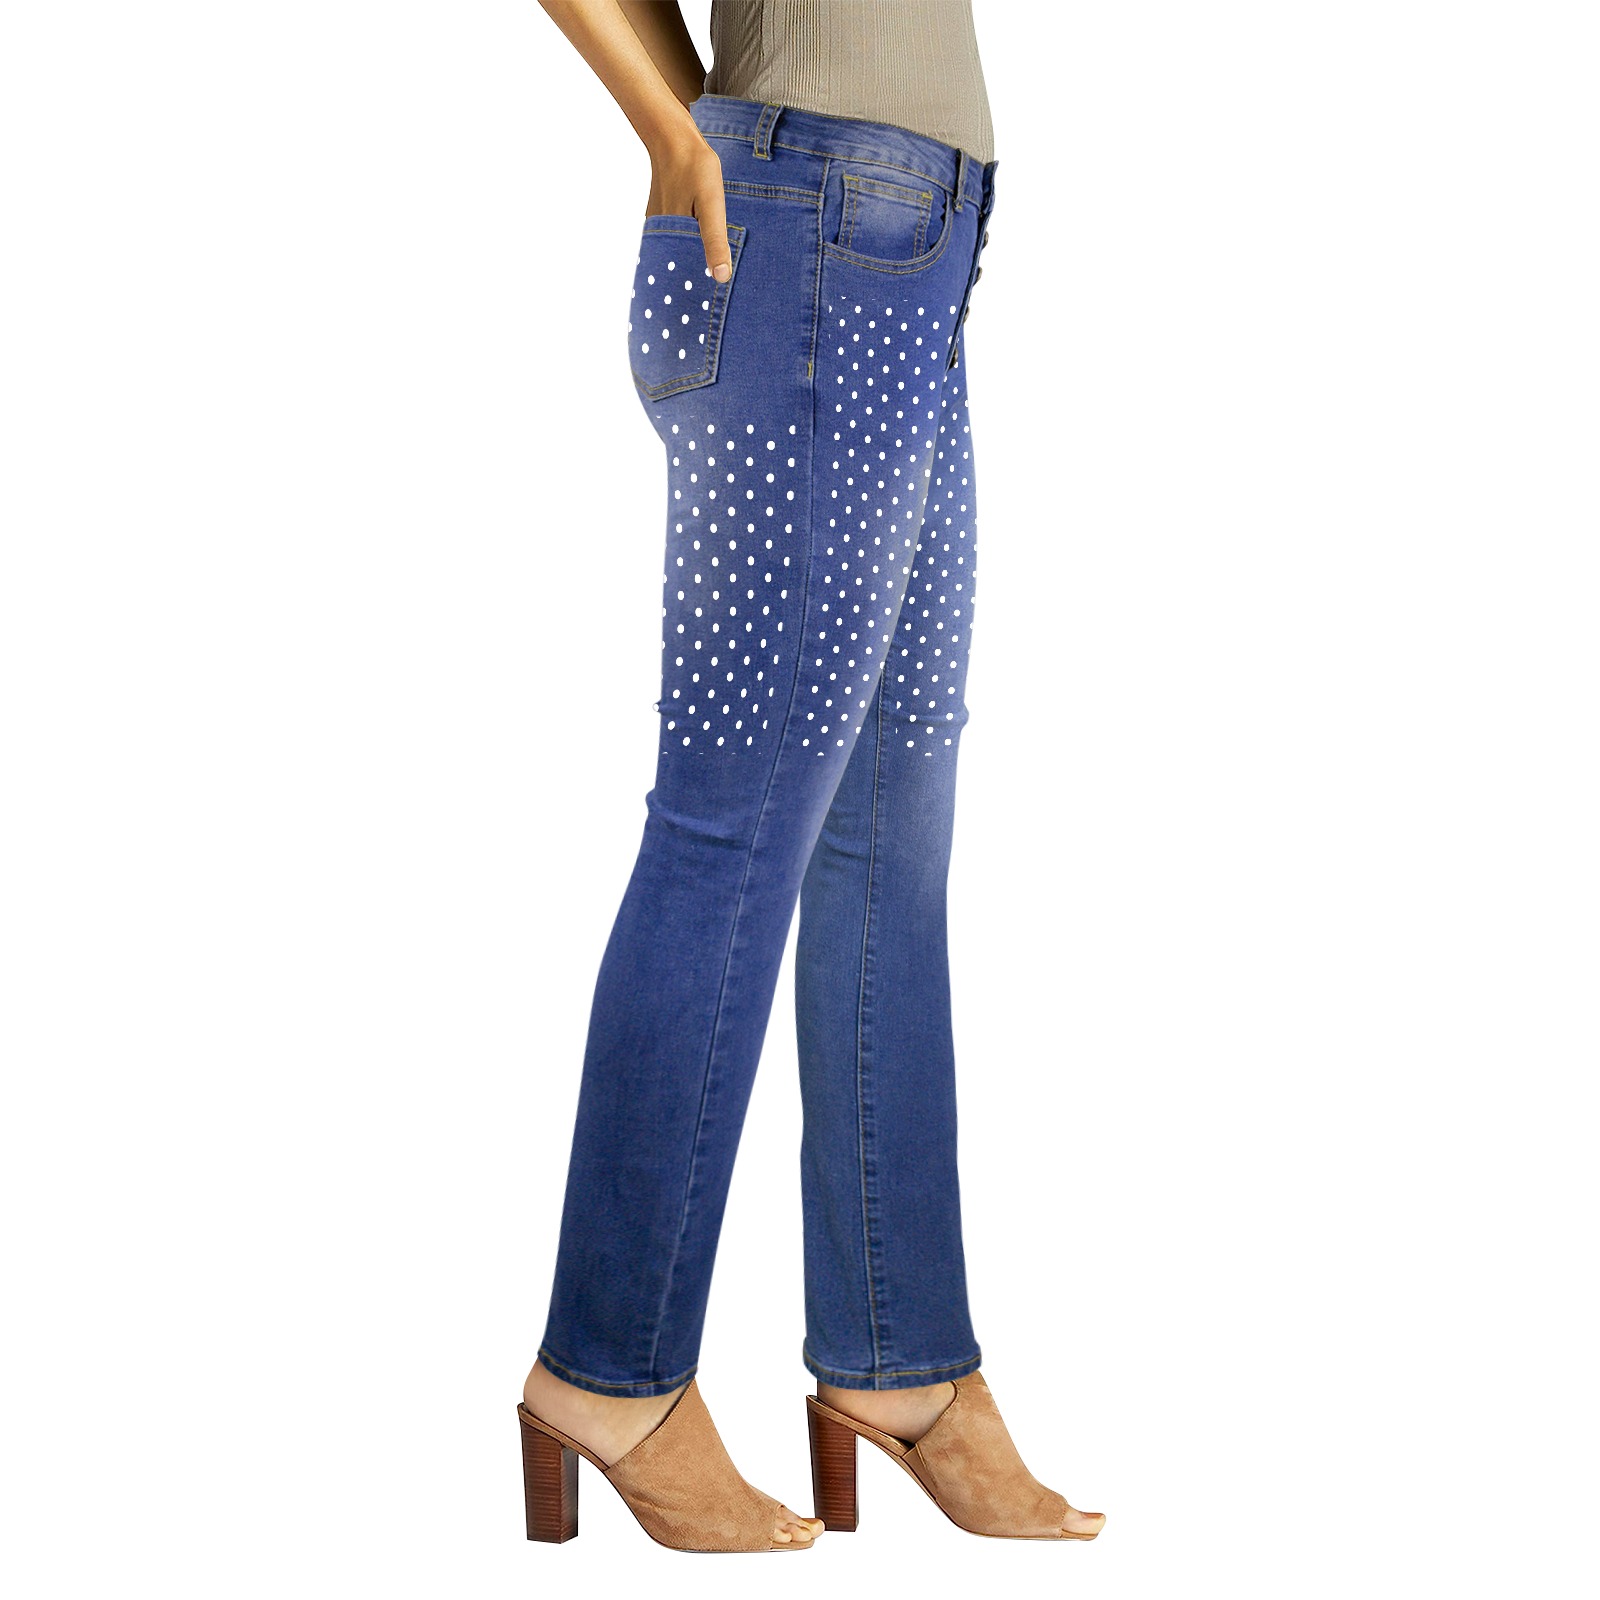 Women's Jeans (Front&Back Printing)